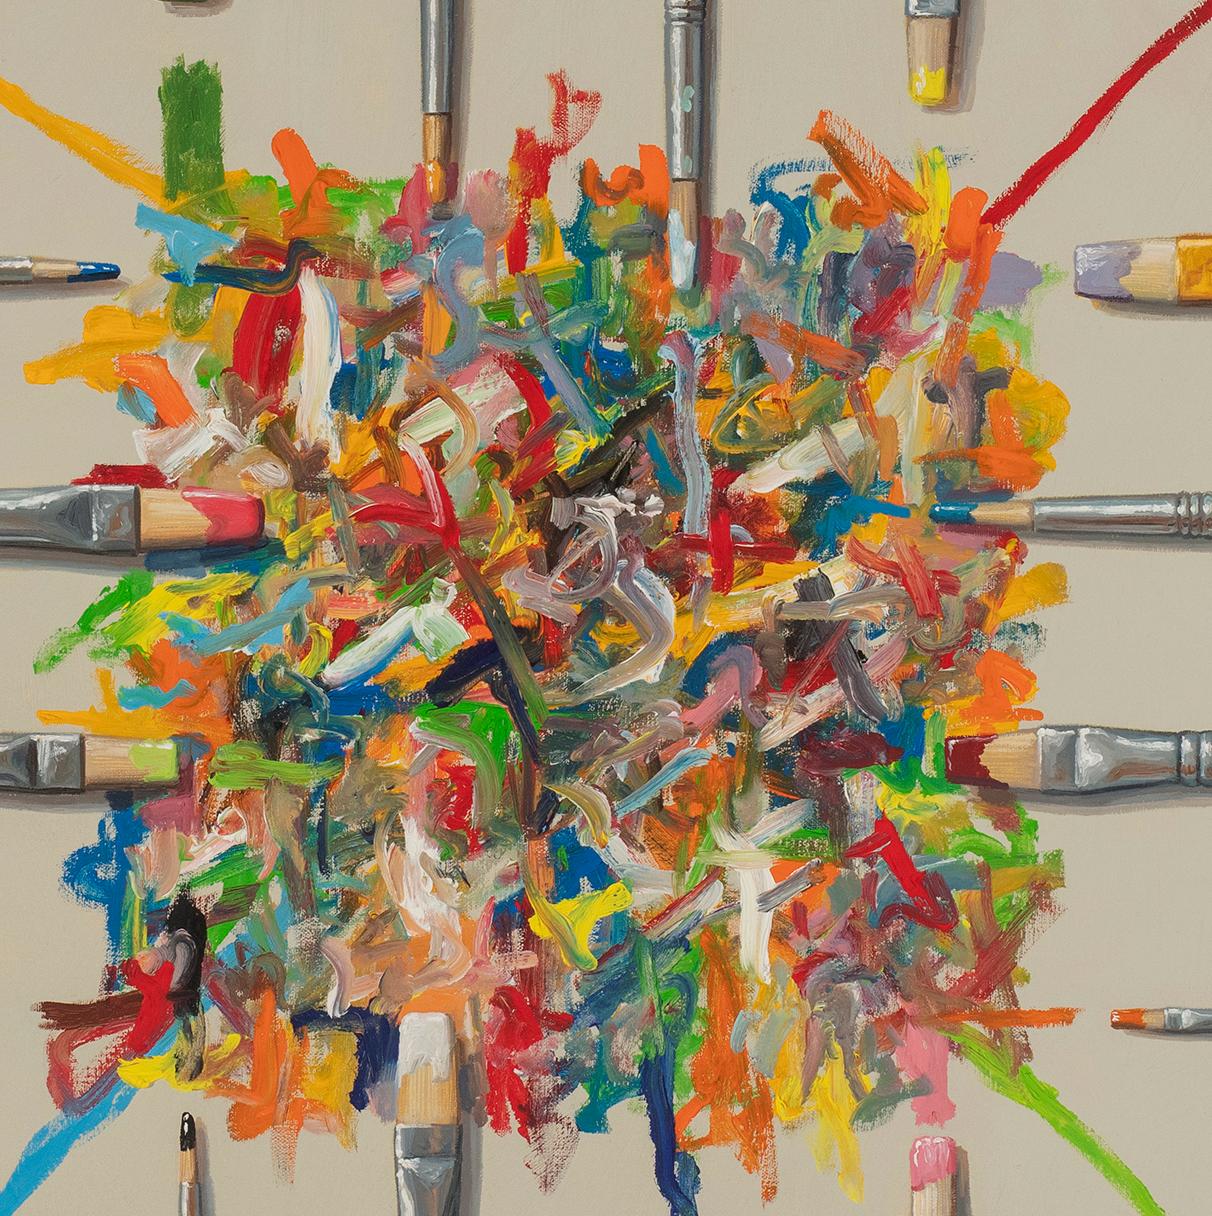 INTERSECTION, photorealism, paint brushes, still-life, multi-colored  - Contemporary Painting by Robert Jackson